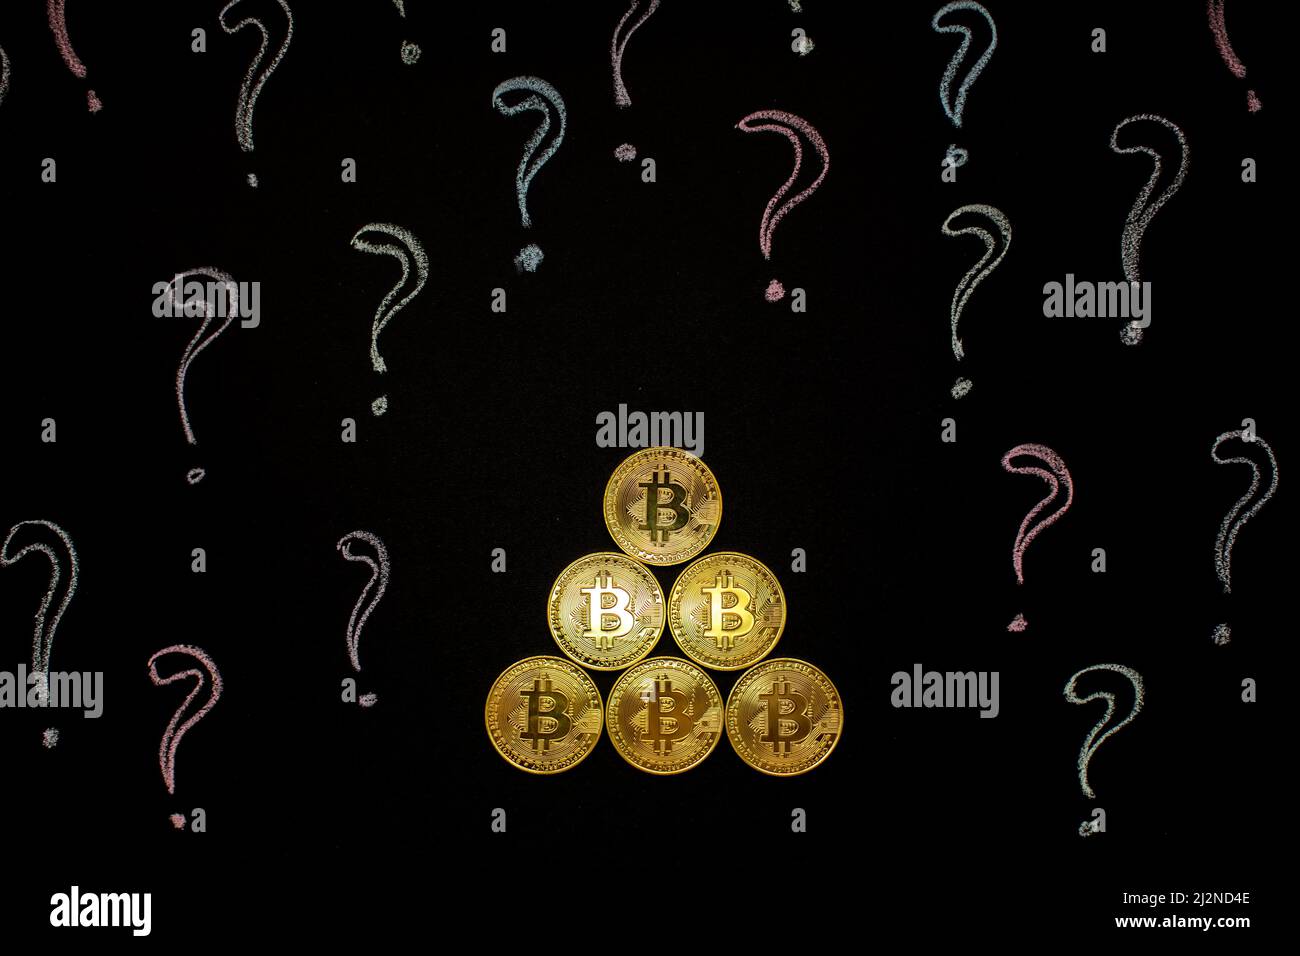 Hand holding Bitcoin virtual money against blackboard with question marks. Digital currency concept Stock Photo